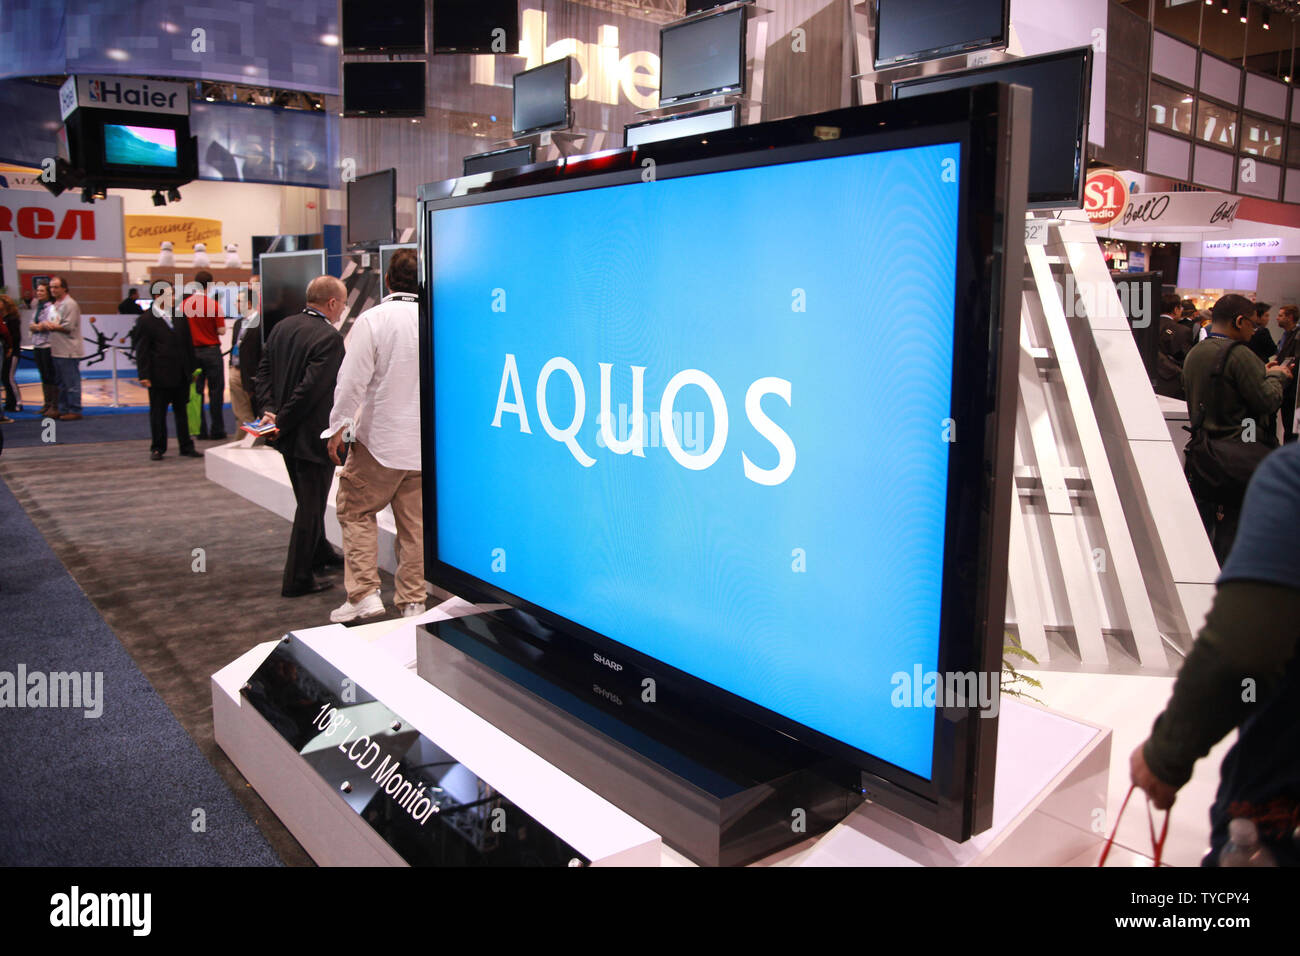 Sharp Corporation displays their Aquos model, world's largest 108 inch LCD monitor during the International Consumer Electronics Show (CES) in Las Vegas on January 8, 2009.  The 2009 CES opened to the public on Thursday and continues through the weekend. (UPI Photo/Tom Theobald) Stock Photo